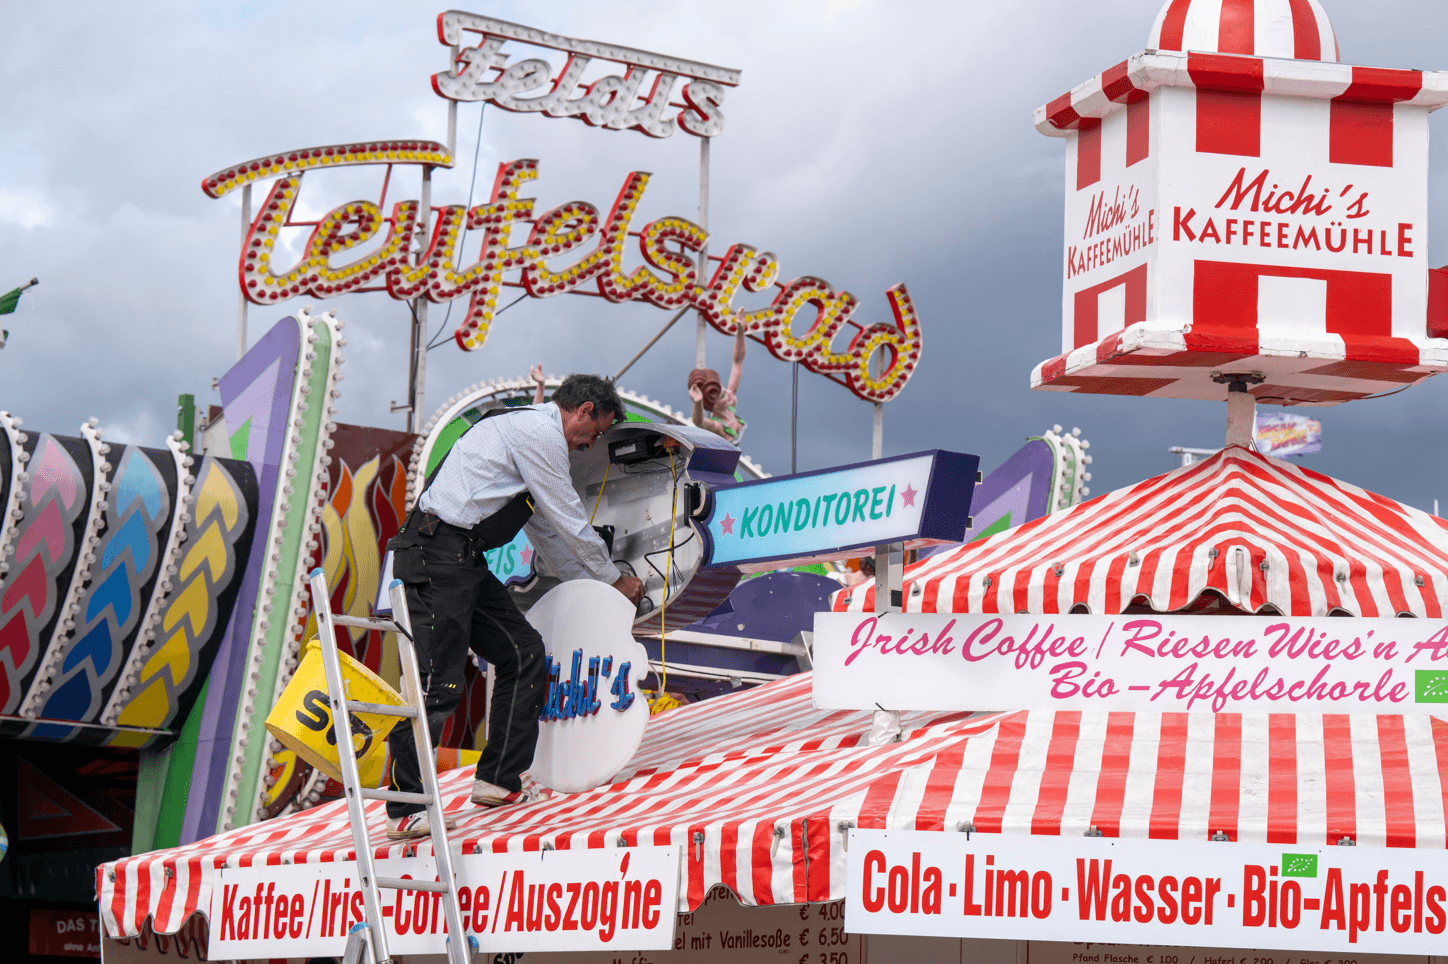 A man mounts a light advertisement on a booth on the Oktoberfest grounds in Munich, Germany, on Thursday. The Oktoberfest is on tap again in Germany after a two-year pandemic interruption. The beer will be just as cold and the pork knuckle just as juicy. But brewers and visitors are under pressure from inflation in ways they could hardly imagine in 2019.  